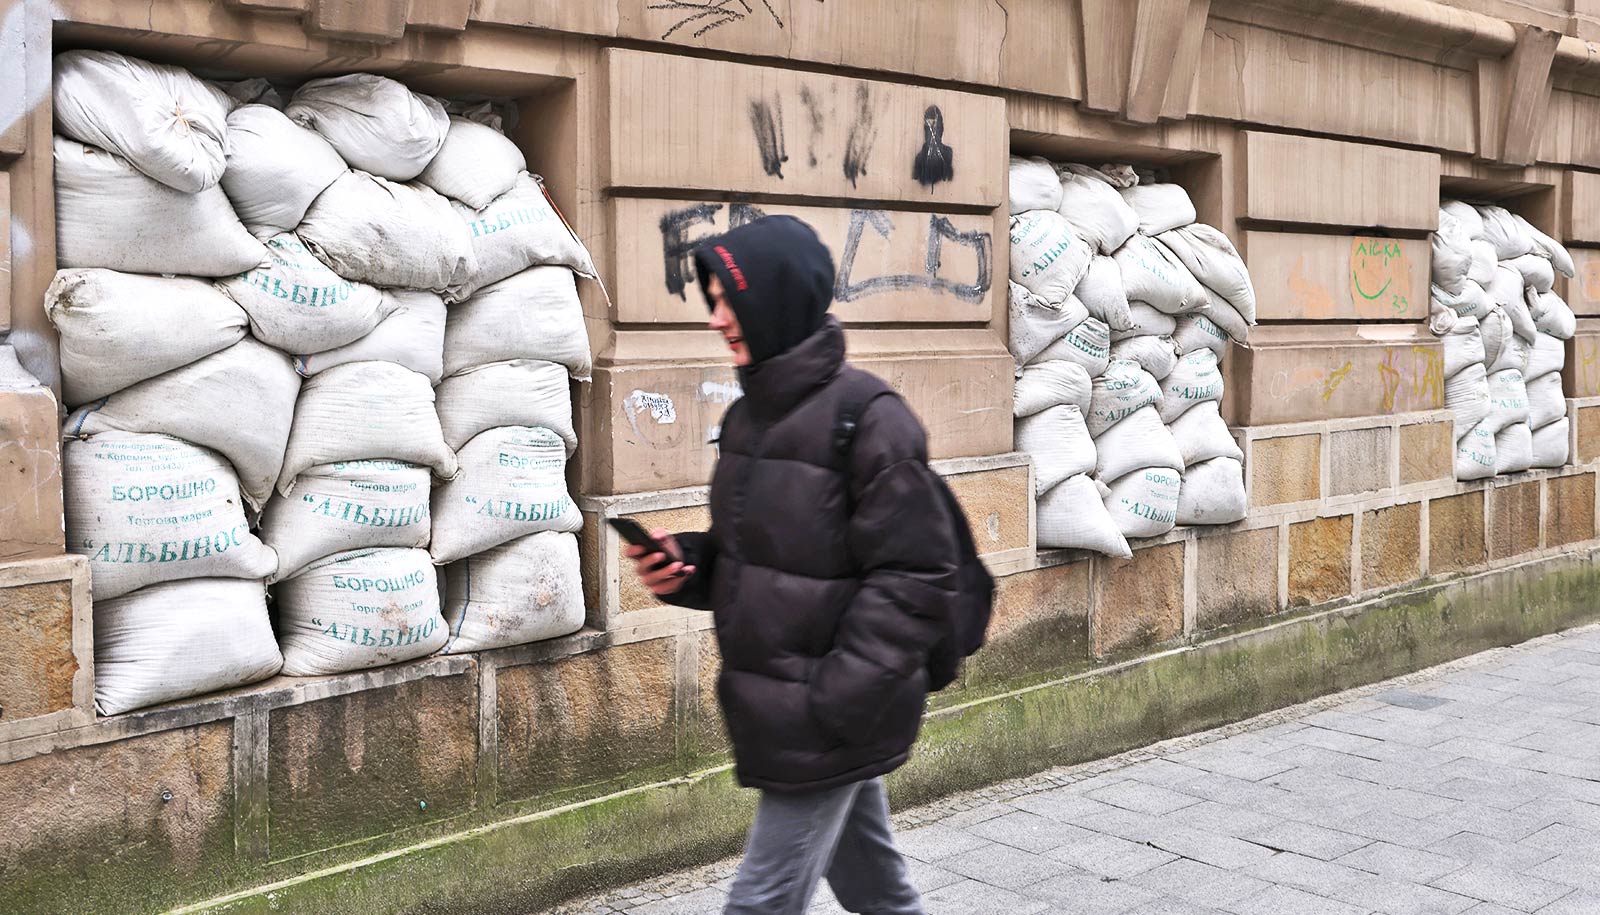 A young man walks past three windows filled up with sandbags.